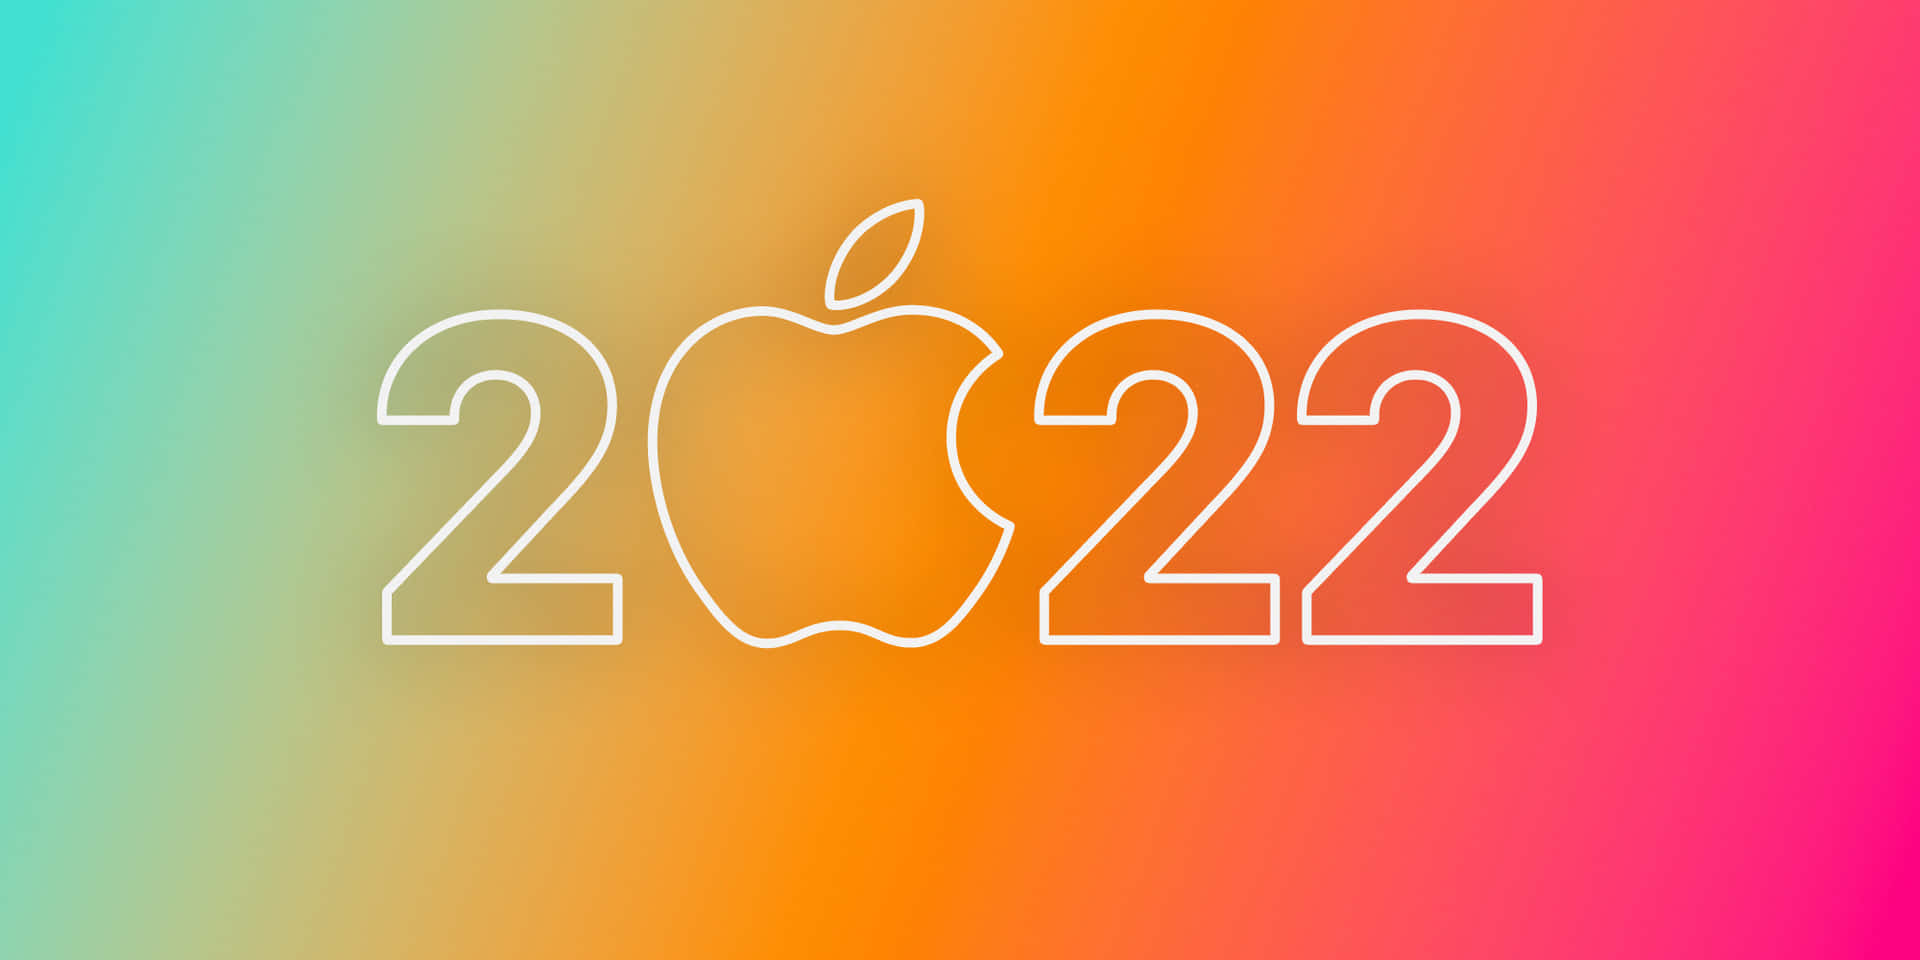 Apple Logo 2022 Pictures